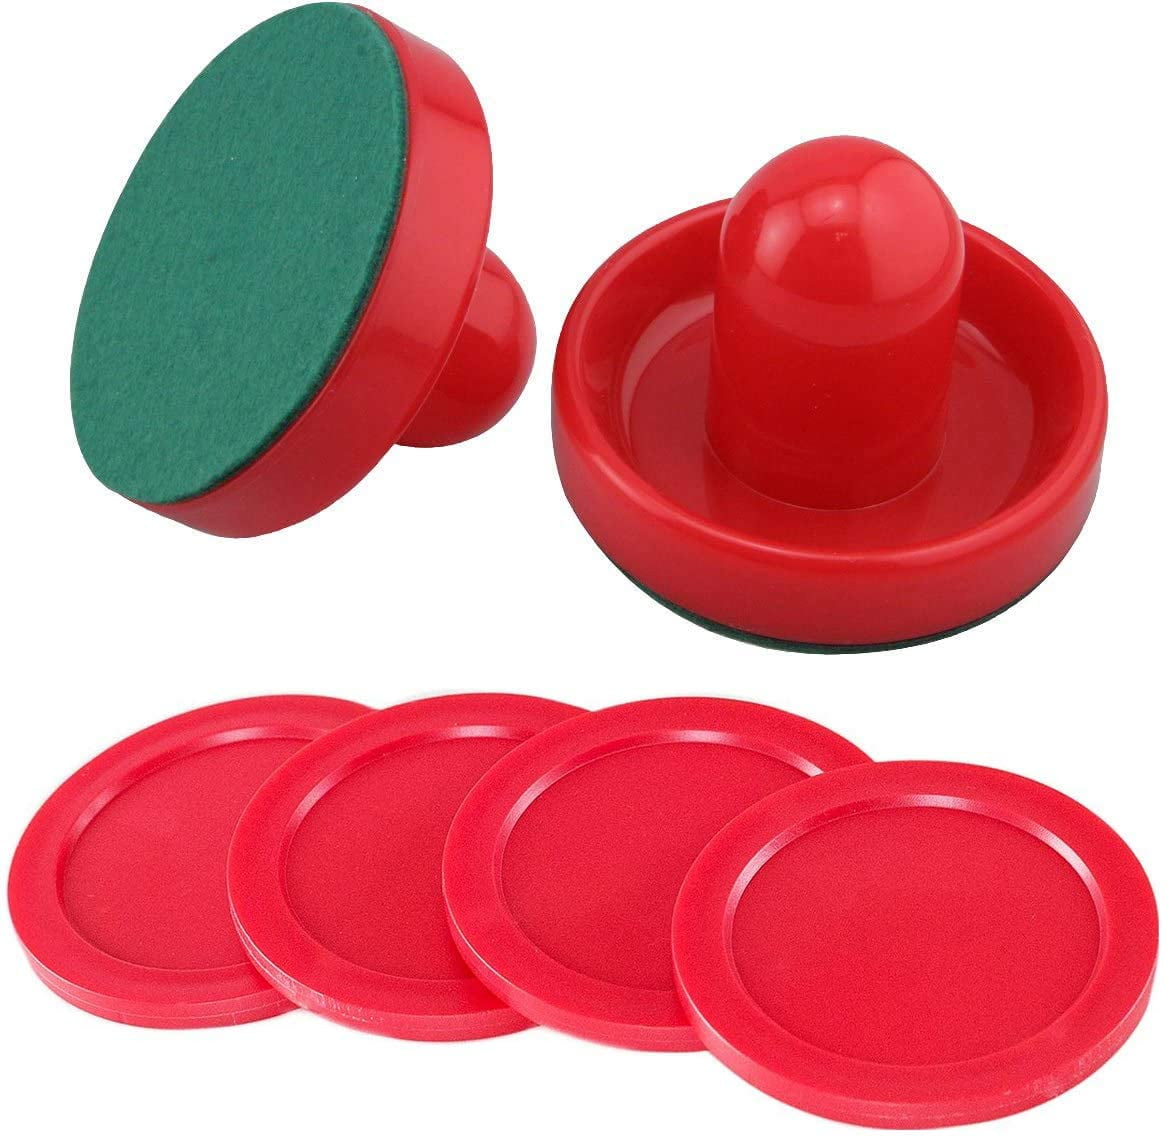 6 Pieces Lightweight Air Hockey Replacement Pucks & Slider Pusher Goalies for Game Tables